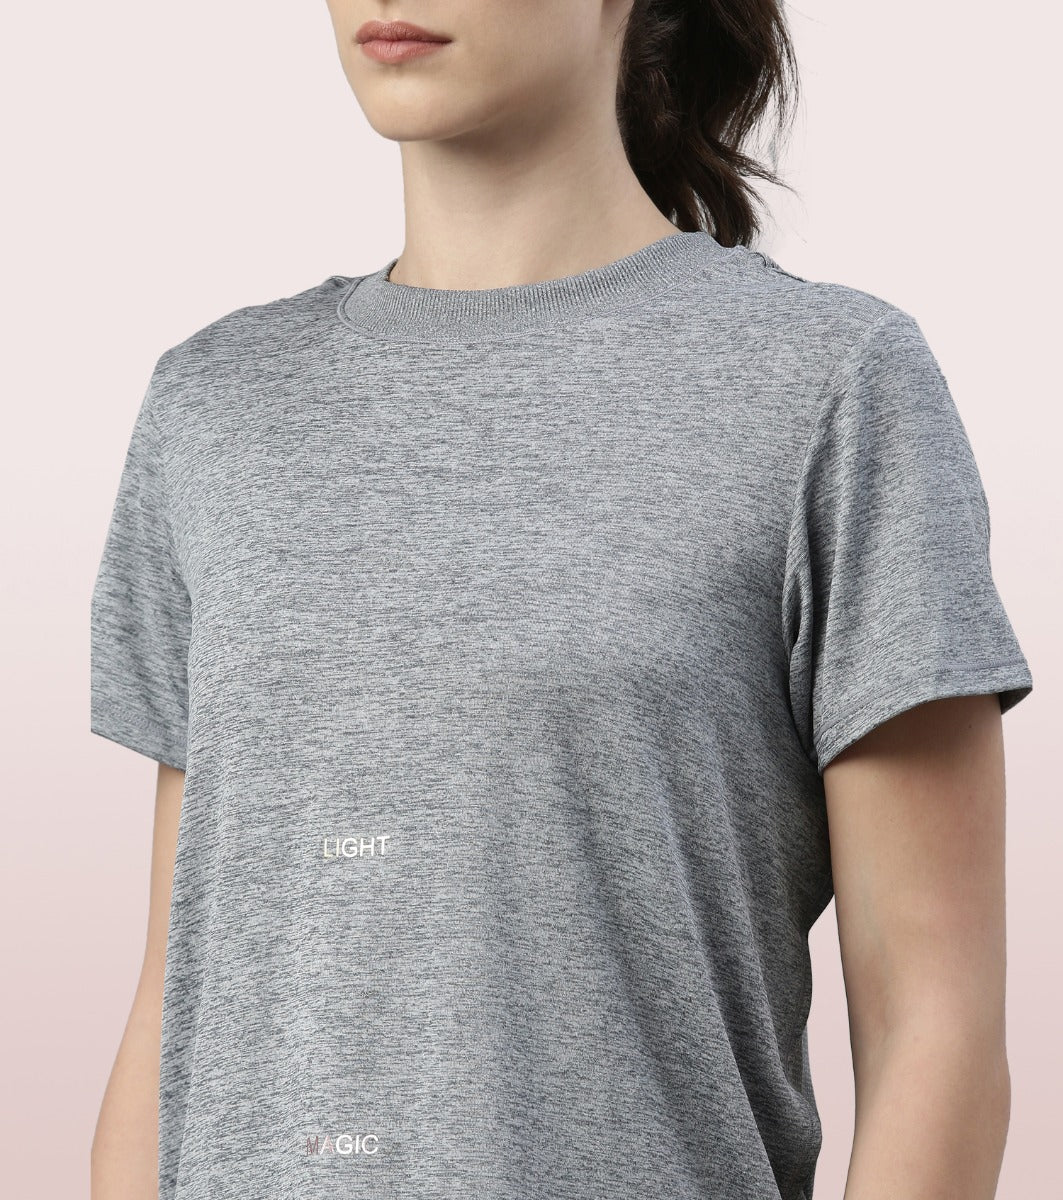 Stay Cool Tee | Short Sleeve Crew Neck Novelty Dry Fit Long Tee